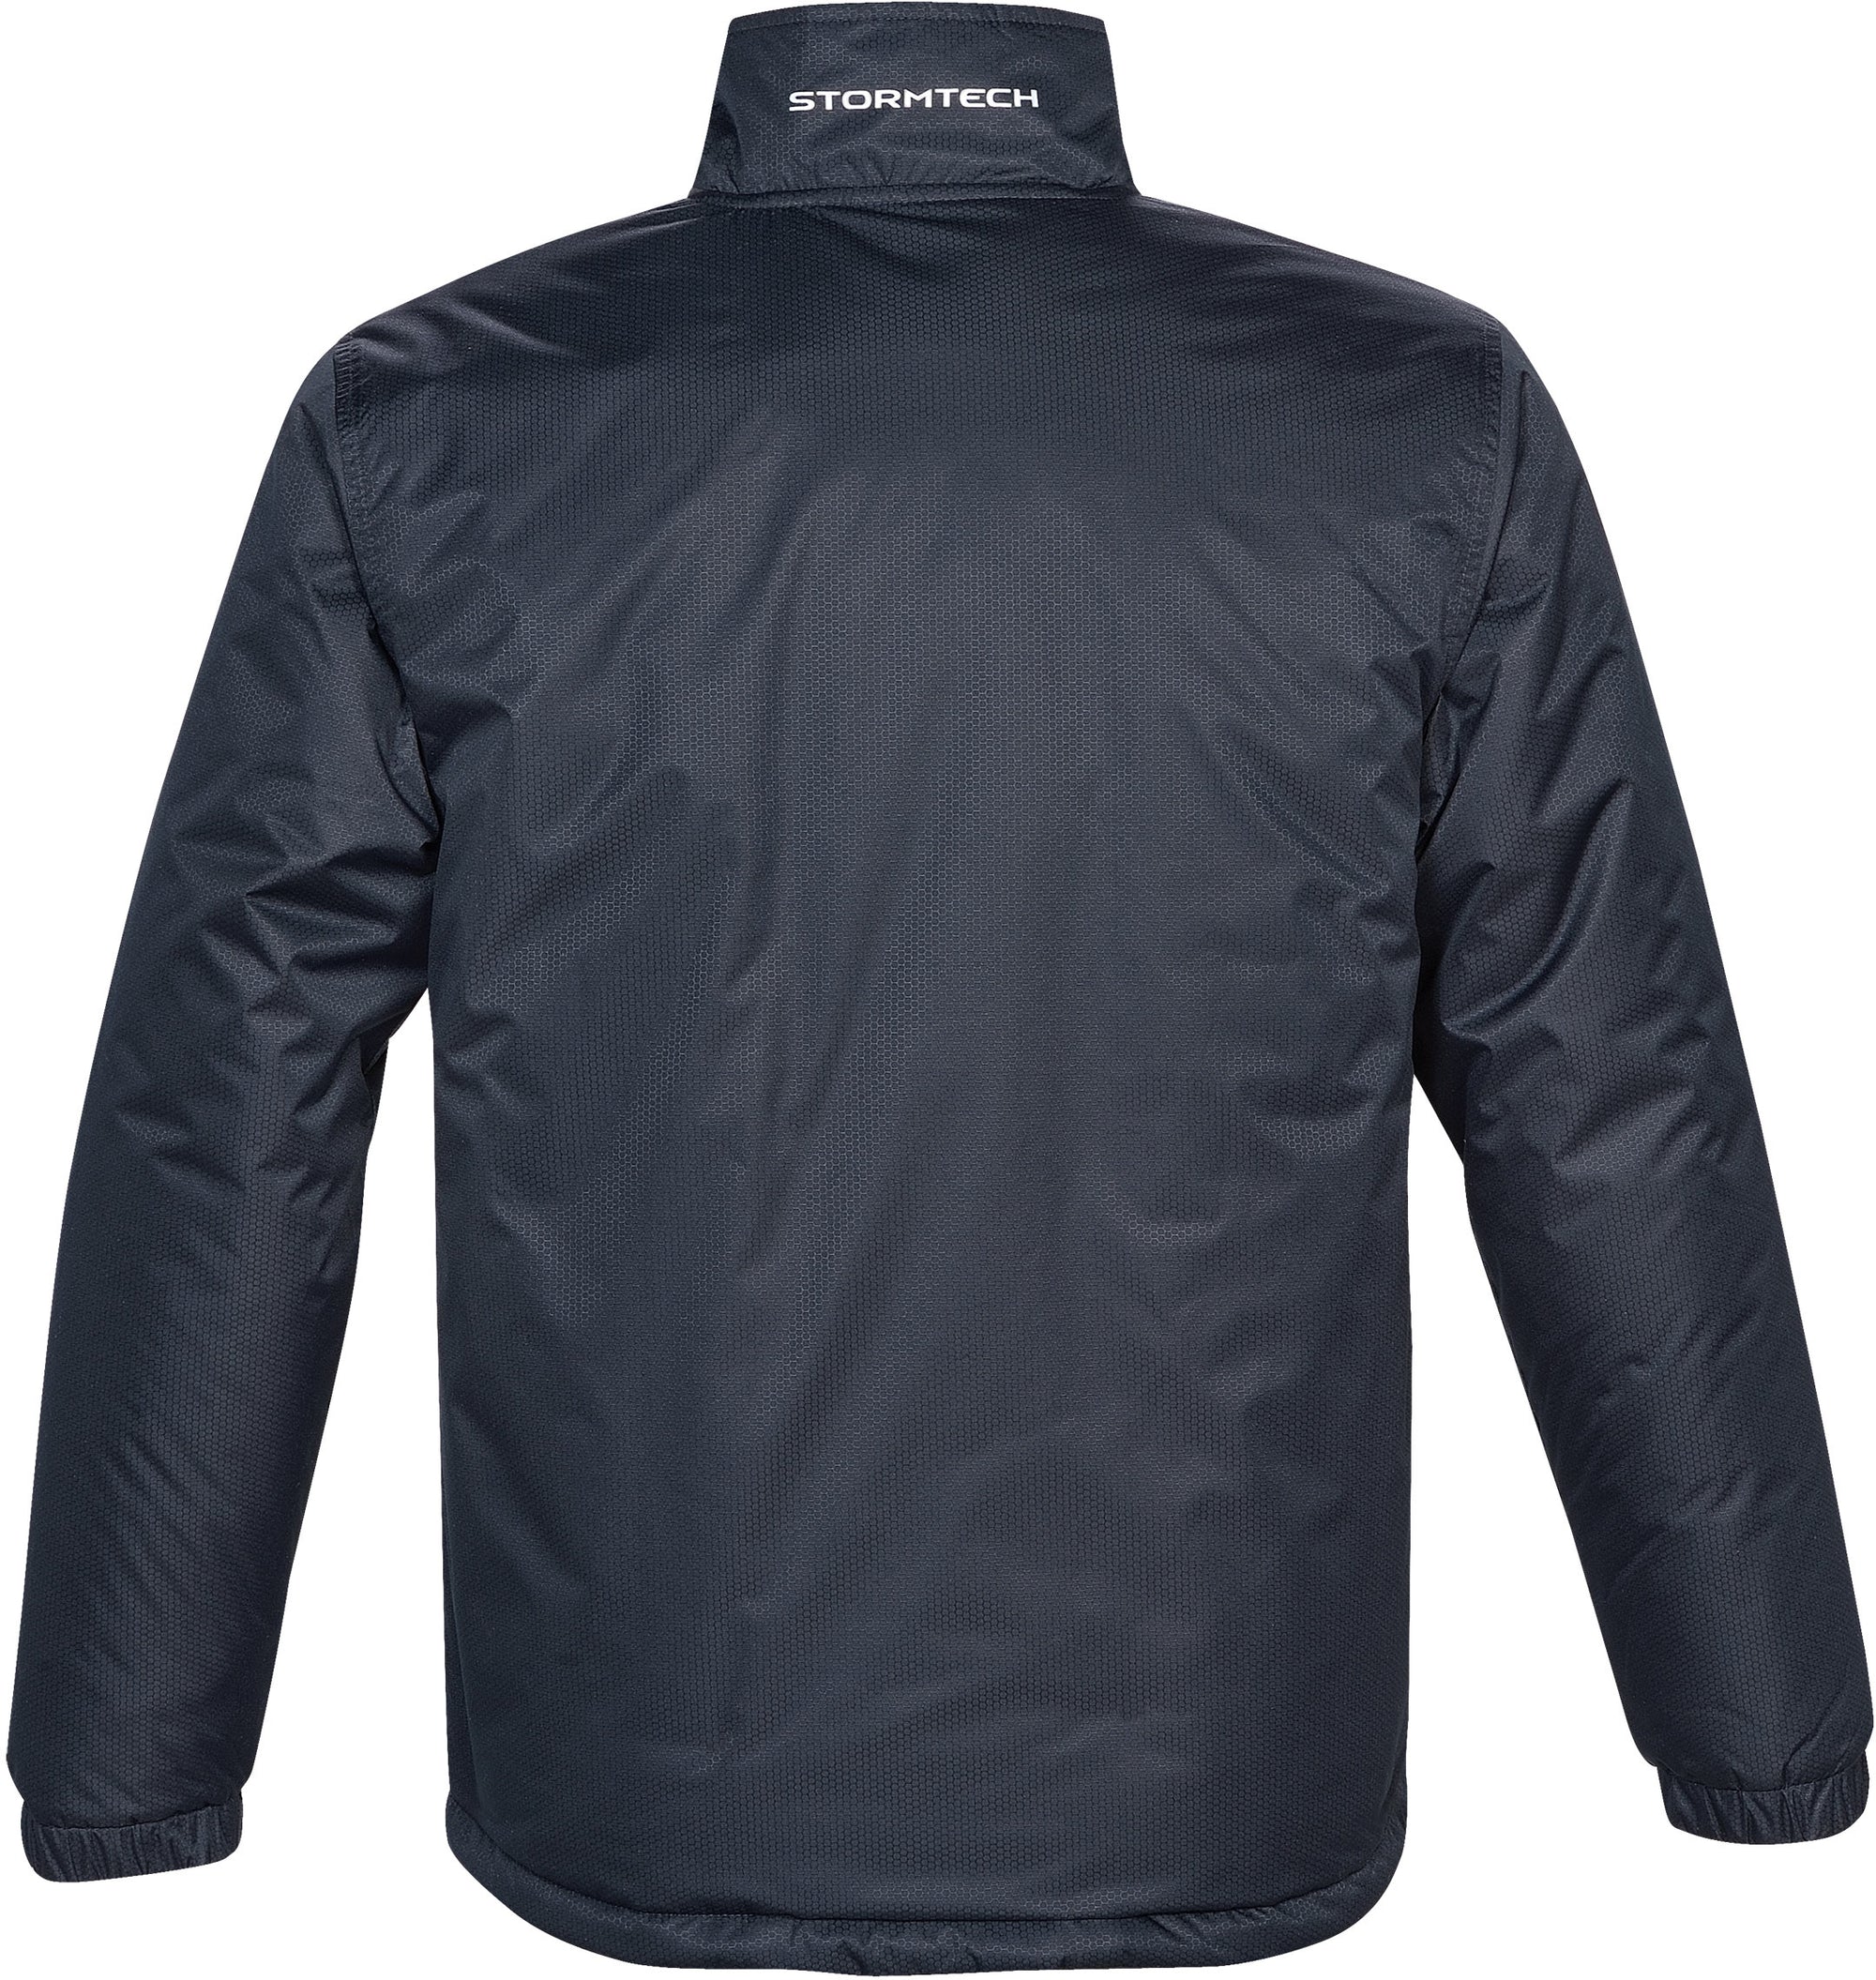 STORMTECH MEN'S AXIS THERMAL SHELL JACKET